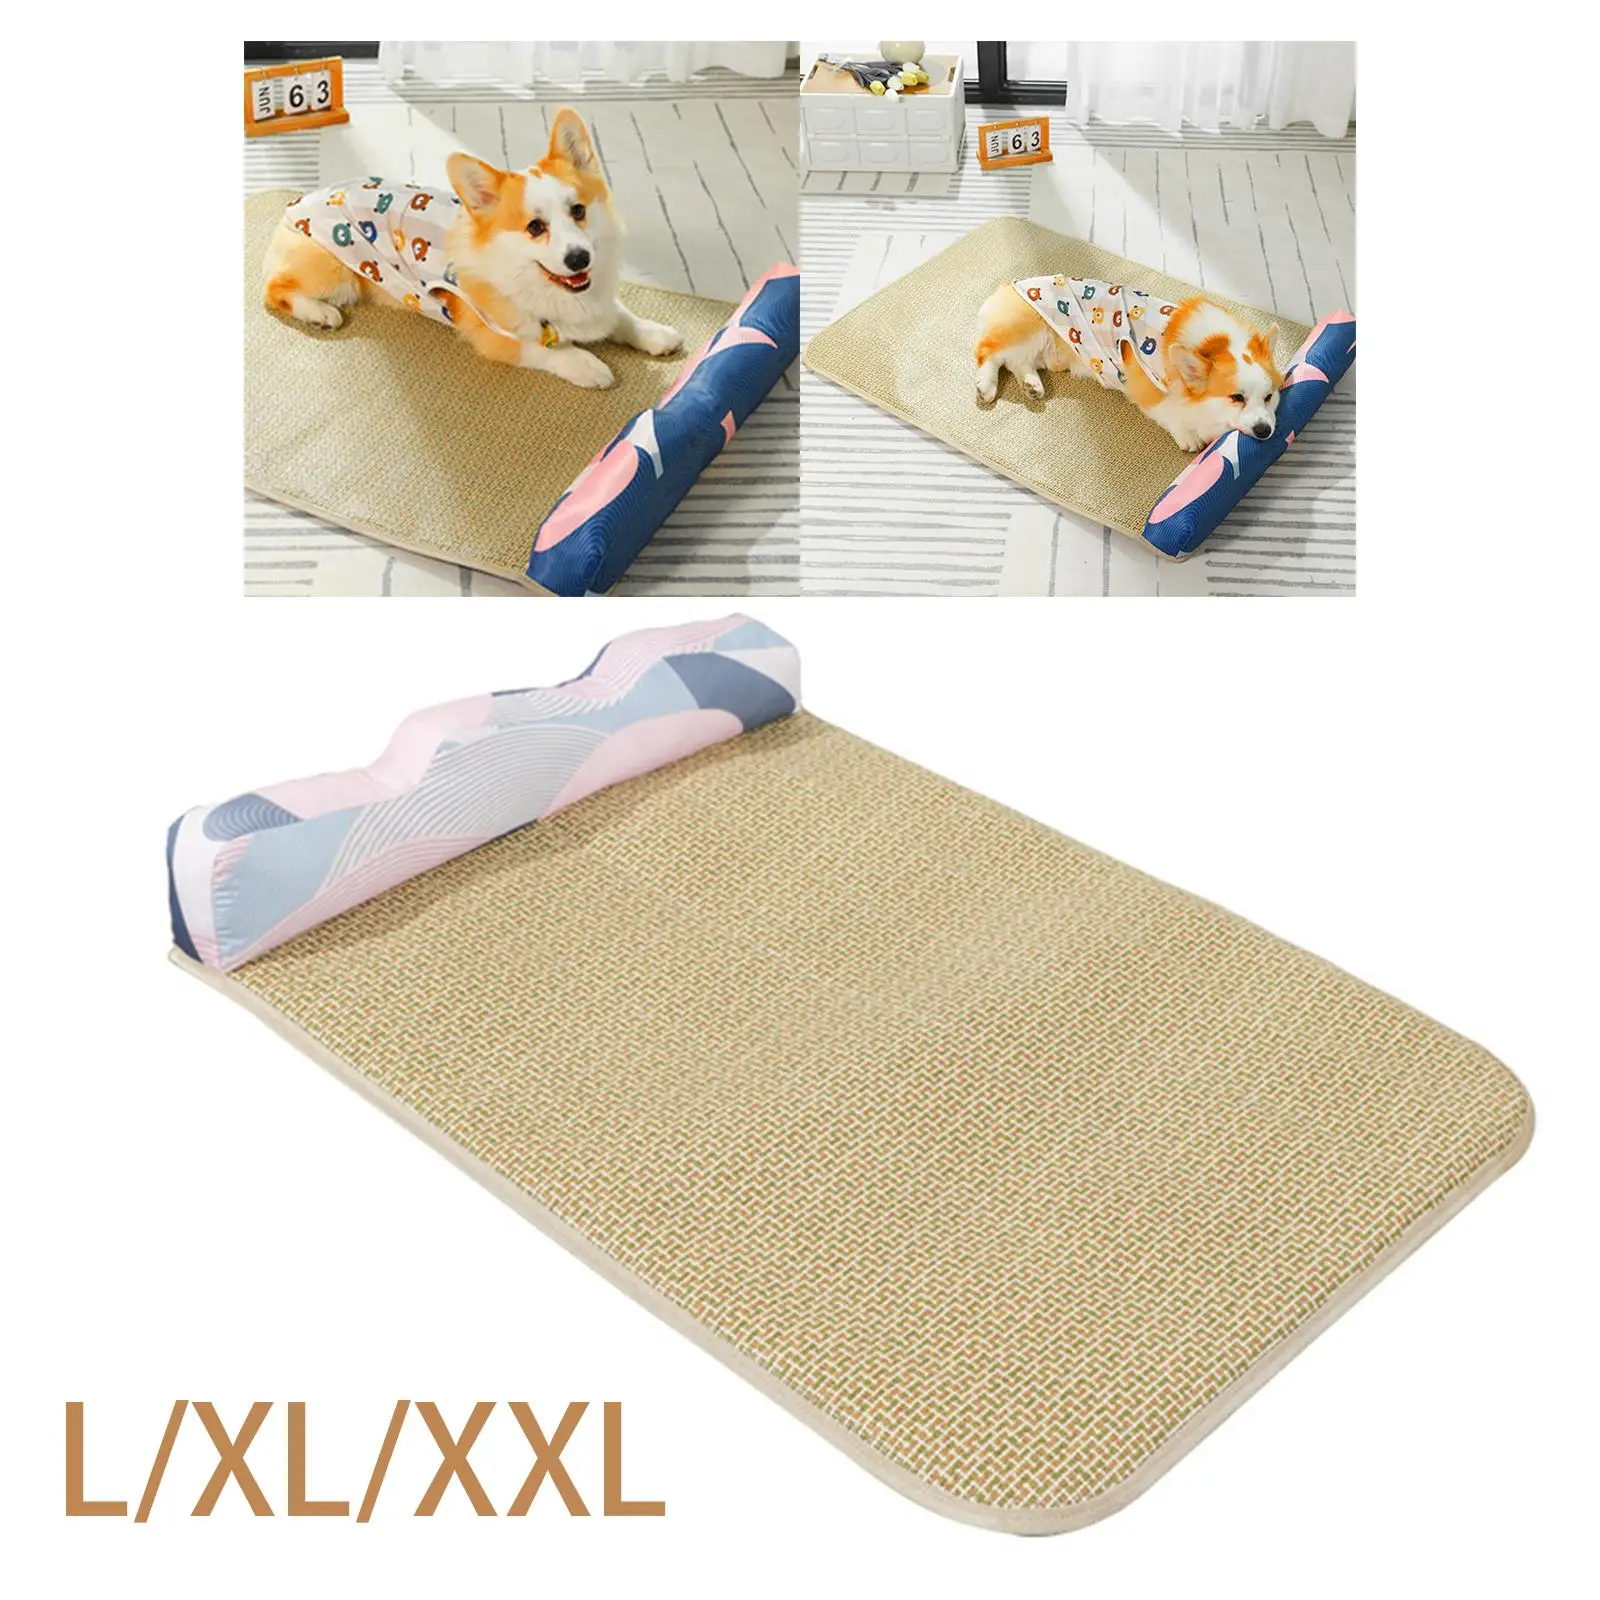 Pet Cooling bed Cooling Mat Self blanket breathable Sleeping Pad for Dogs for summer Couches Floors